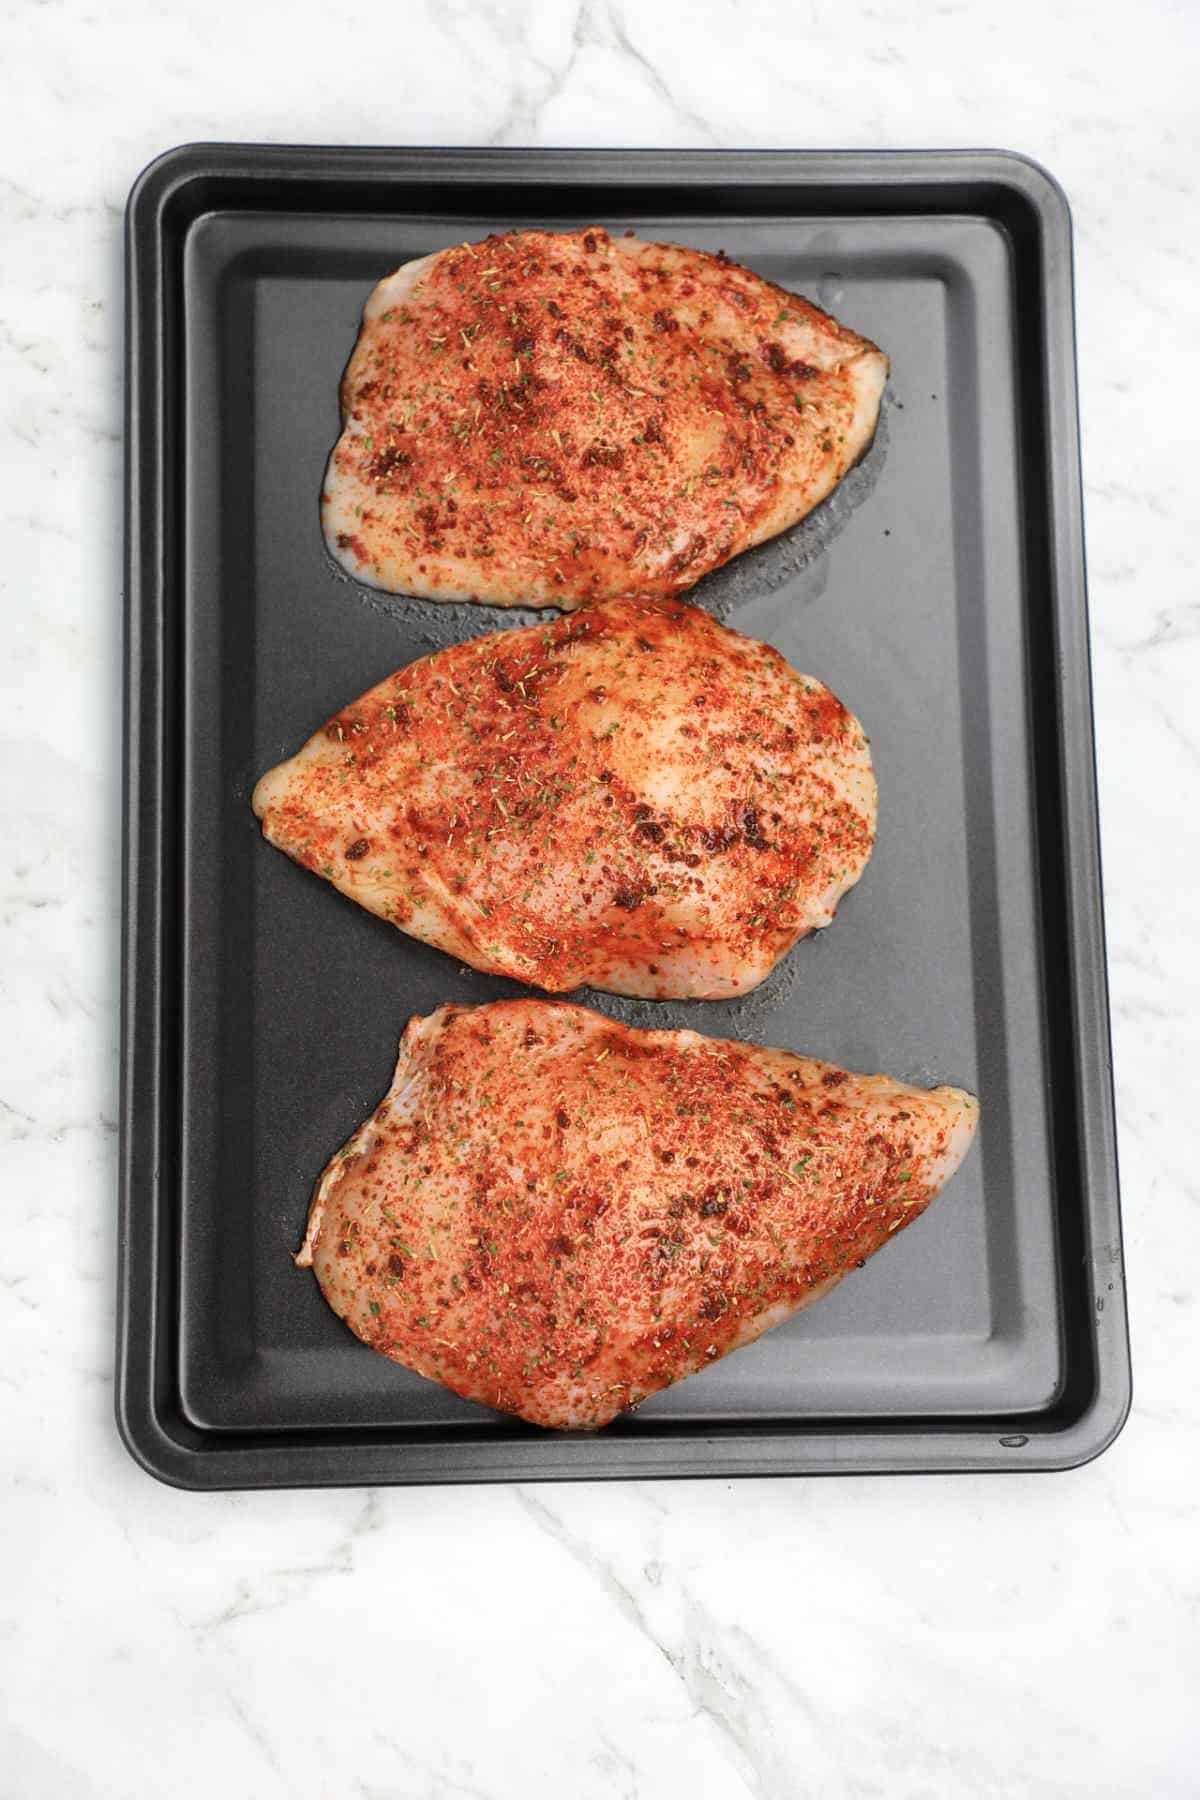 seasoned pieces arranged on a baking tray.